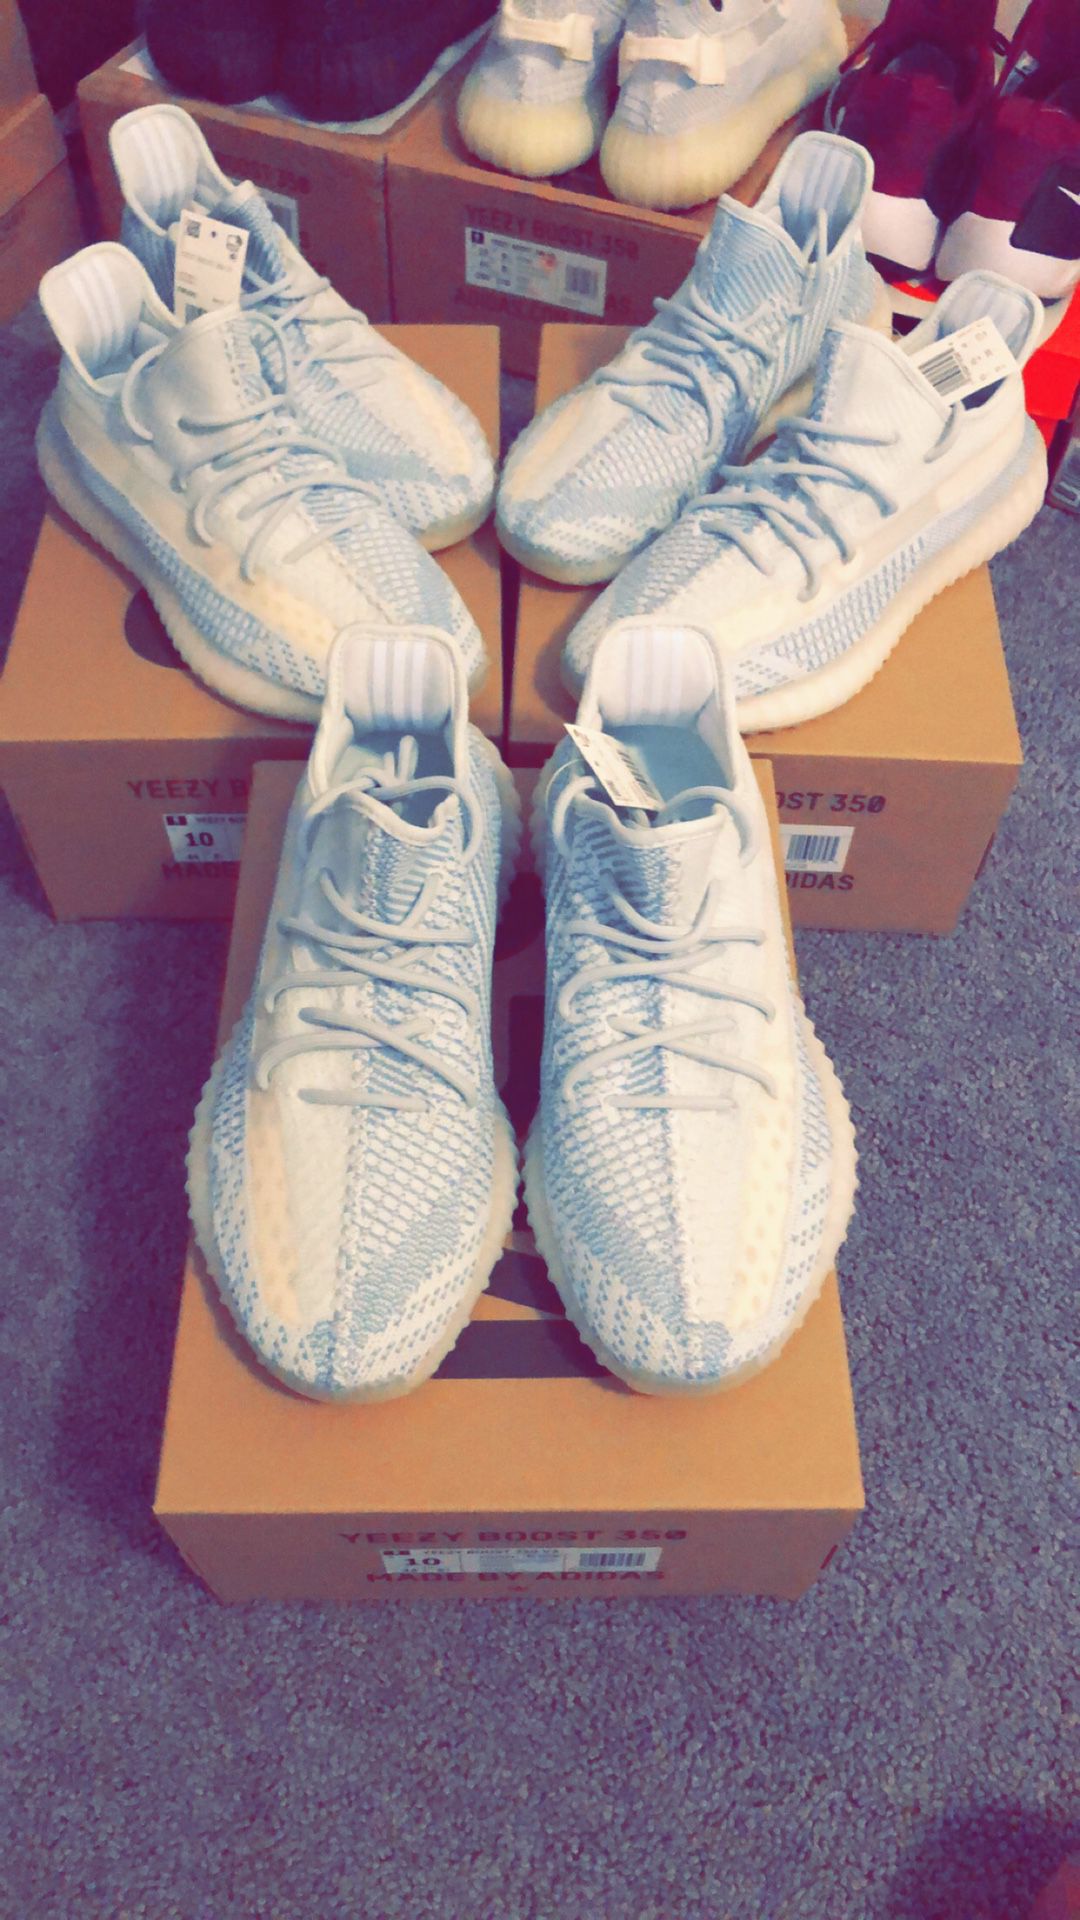 Yeezy Boost 350 v2 Cloud White Size 10